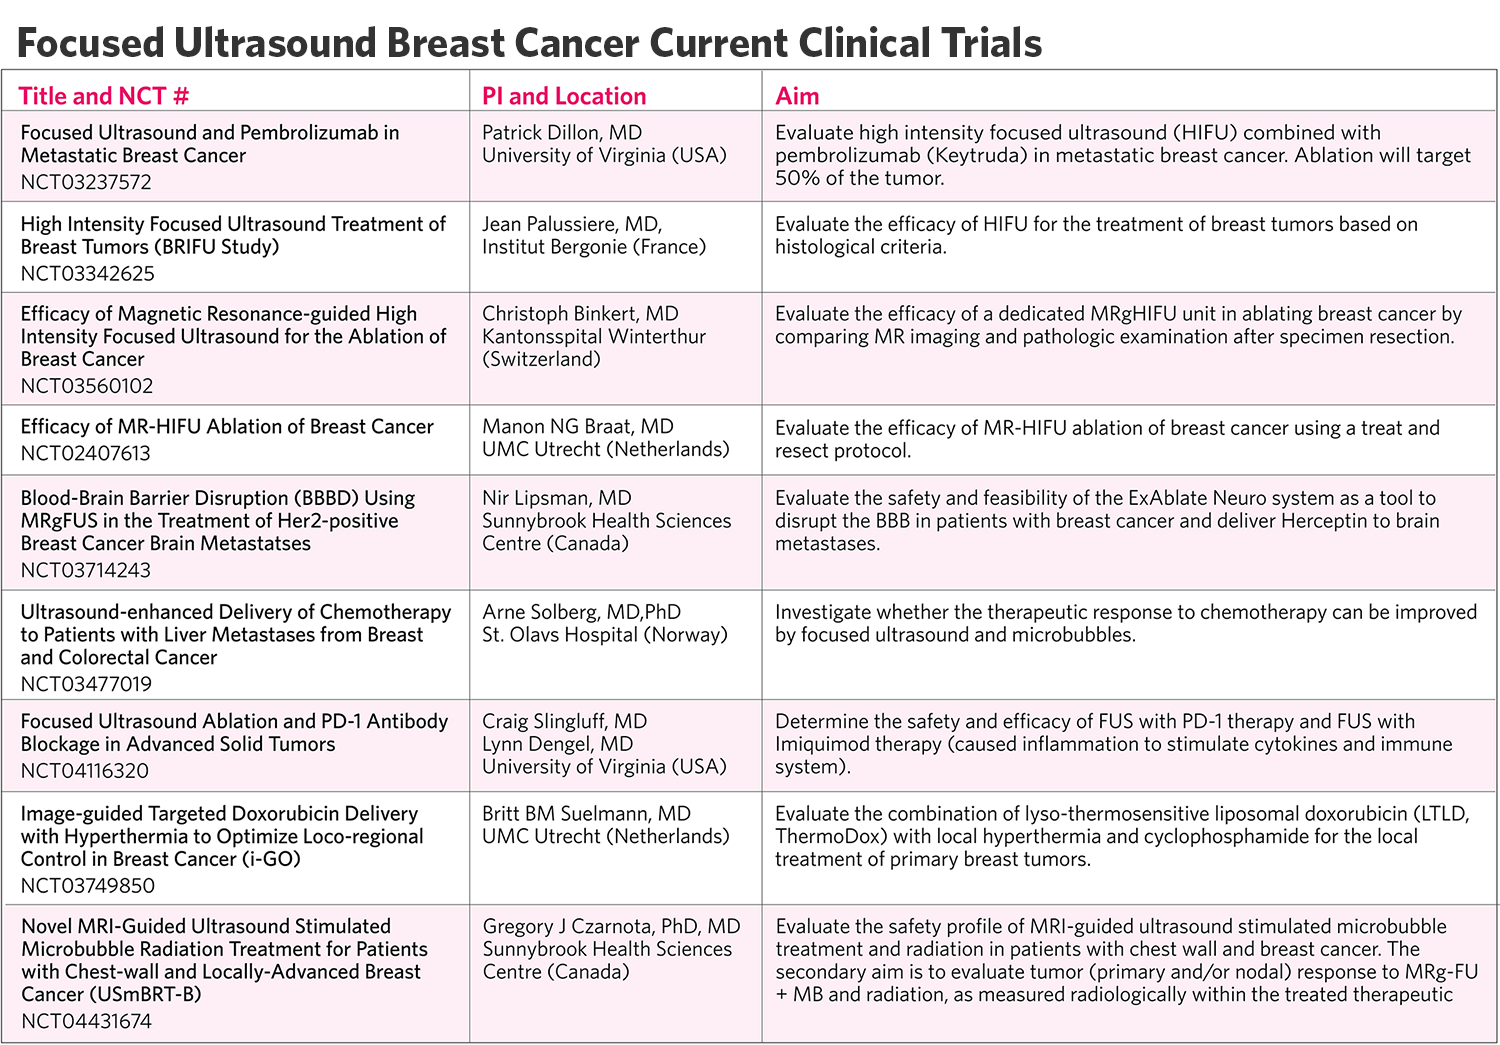 Focused Ultrasound for Breast Cancer Current Clinical Trials